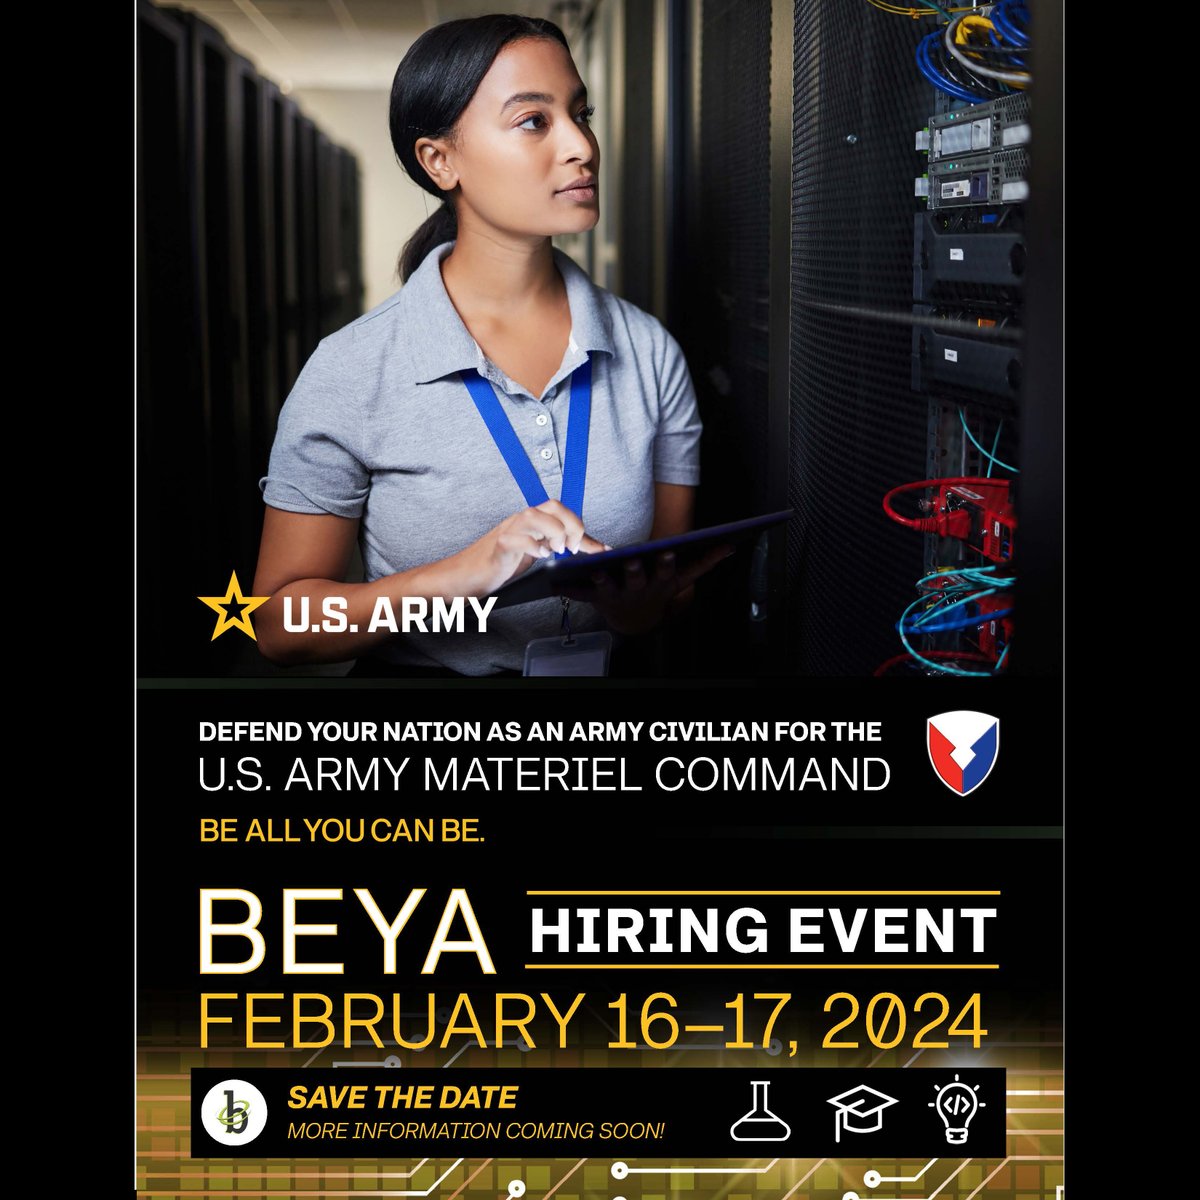 Looking for a job? Become an Army civilian employee working for Installation Management Command in engineering, finance, community planning, energy and other fields. Attend the BEYA Hiring Event, FREE for job seekers. #BeAllYouCanBe #BEYAstem

spr.ly/6019pzLeb